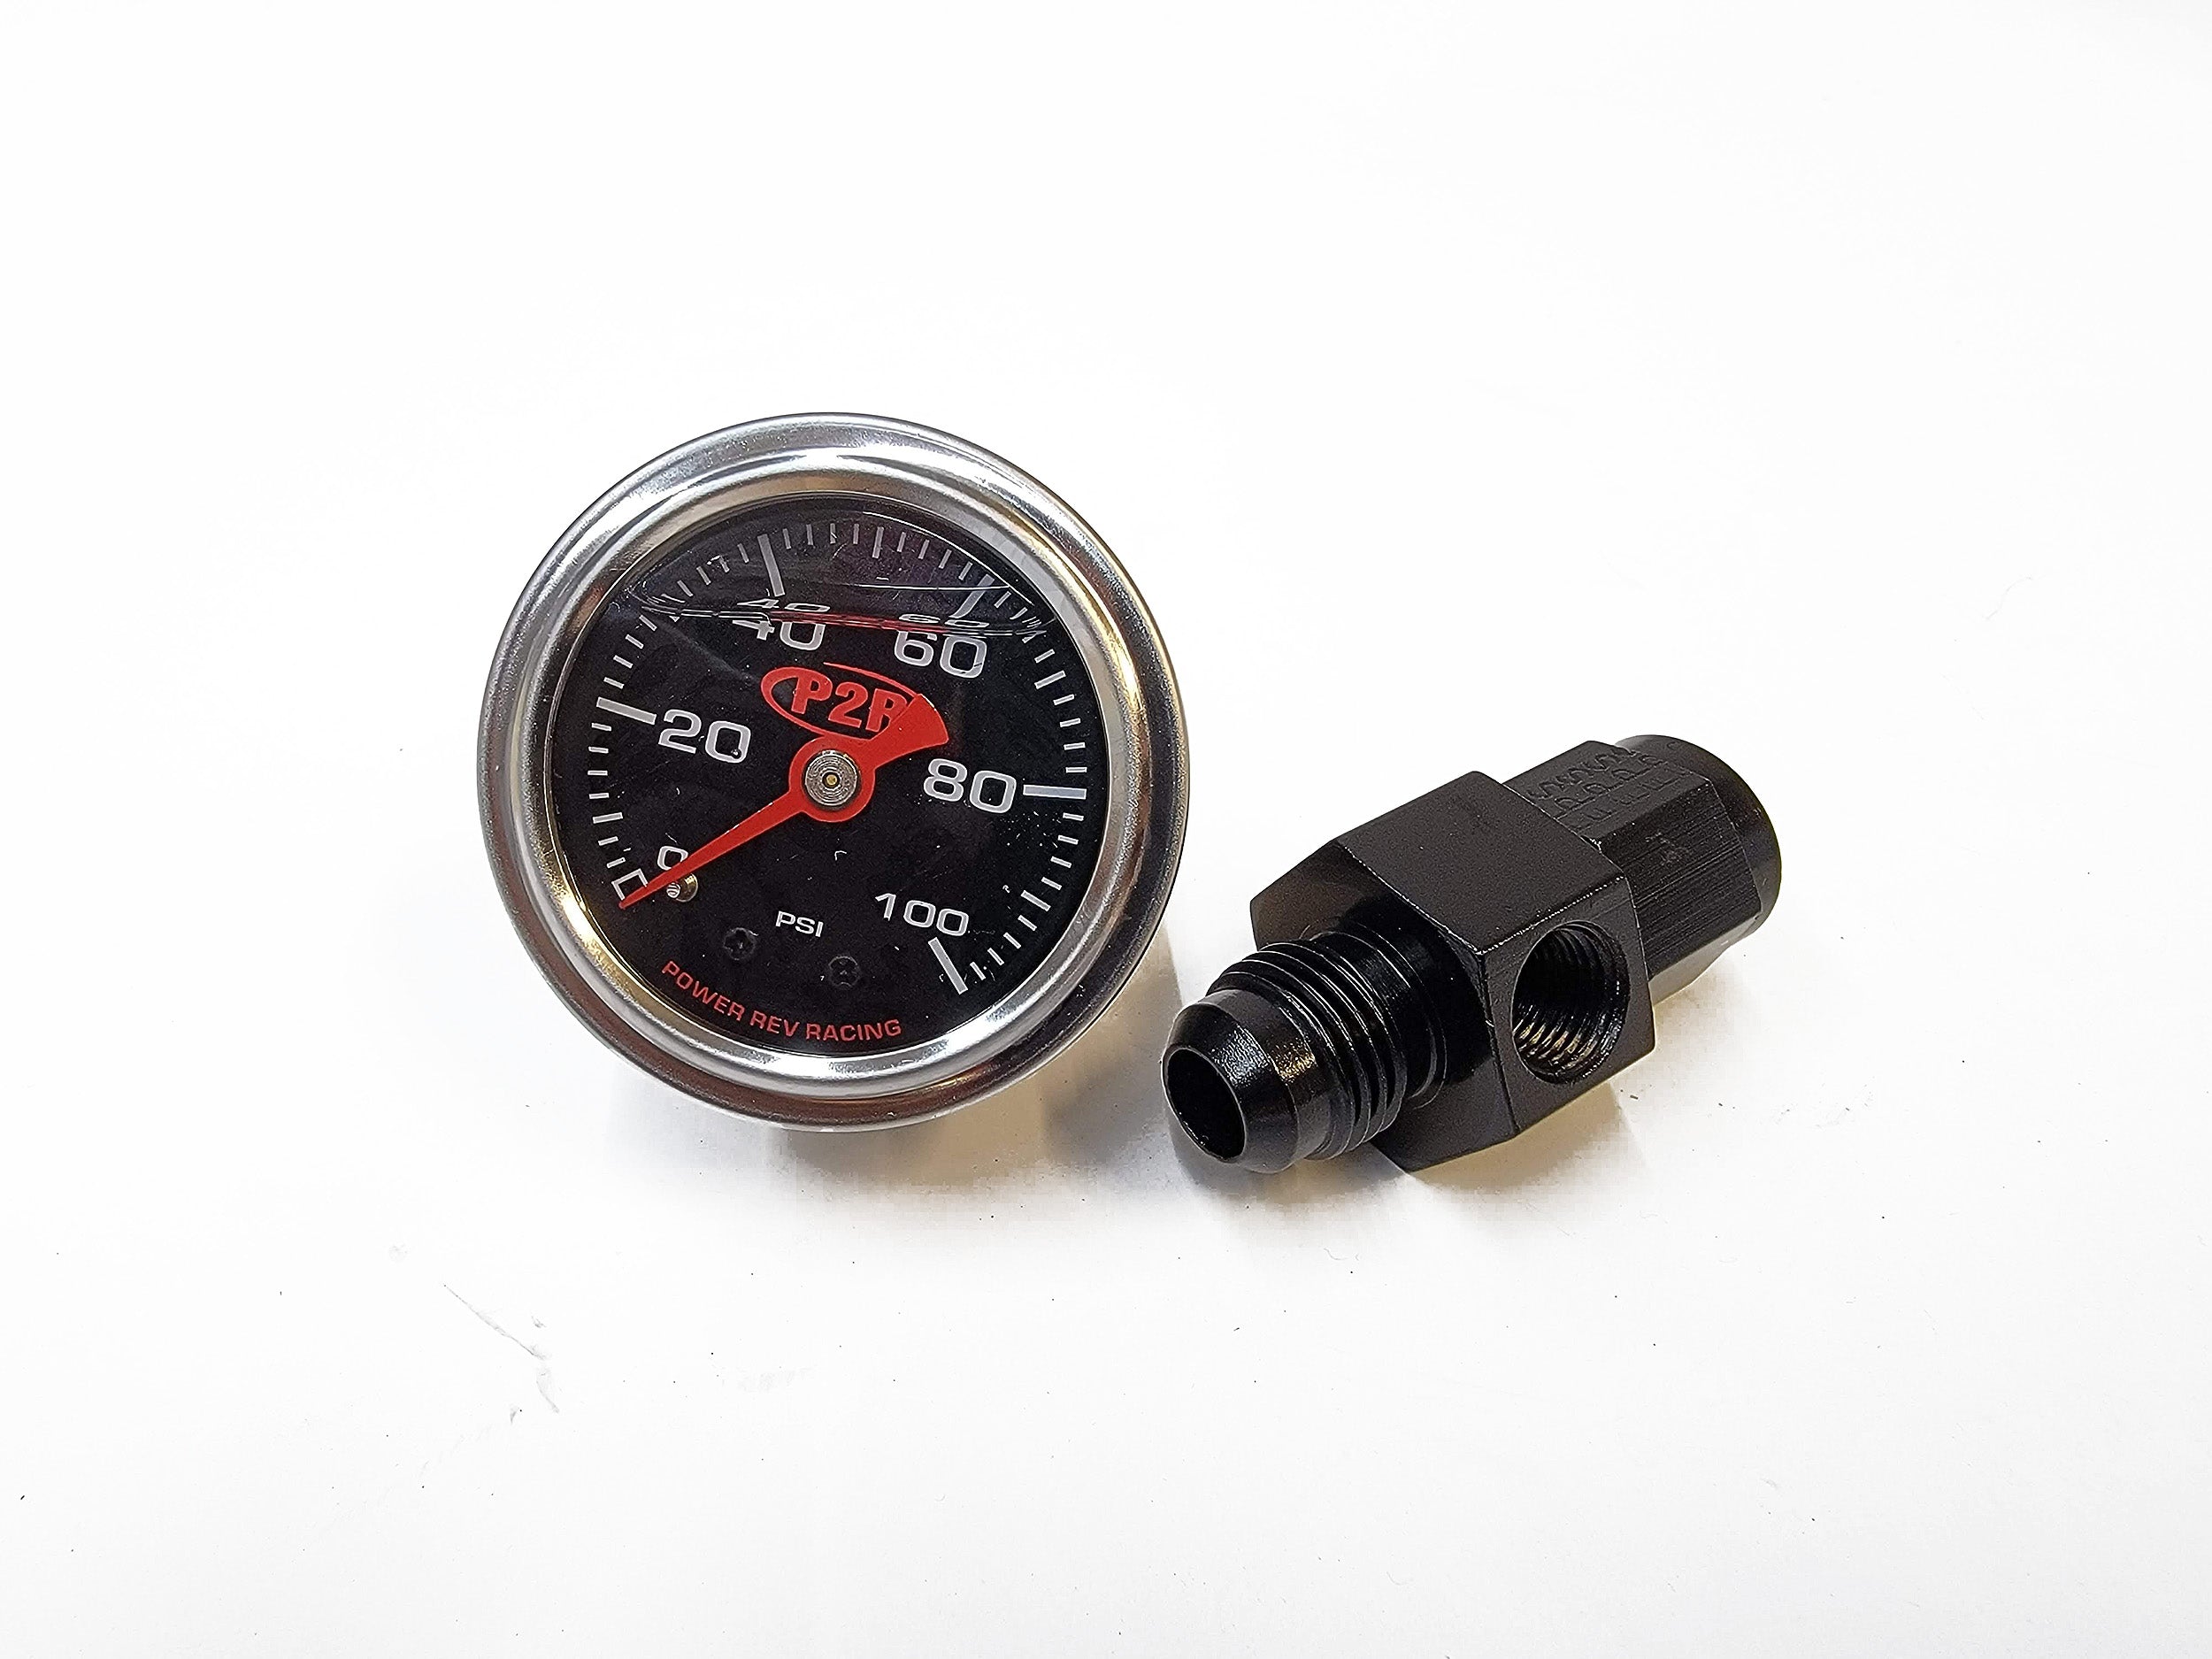 Liquid Filled Fuel Psi Gauge with 6an Port Adapter